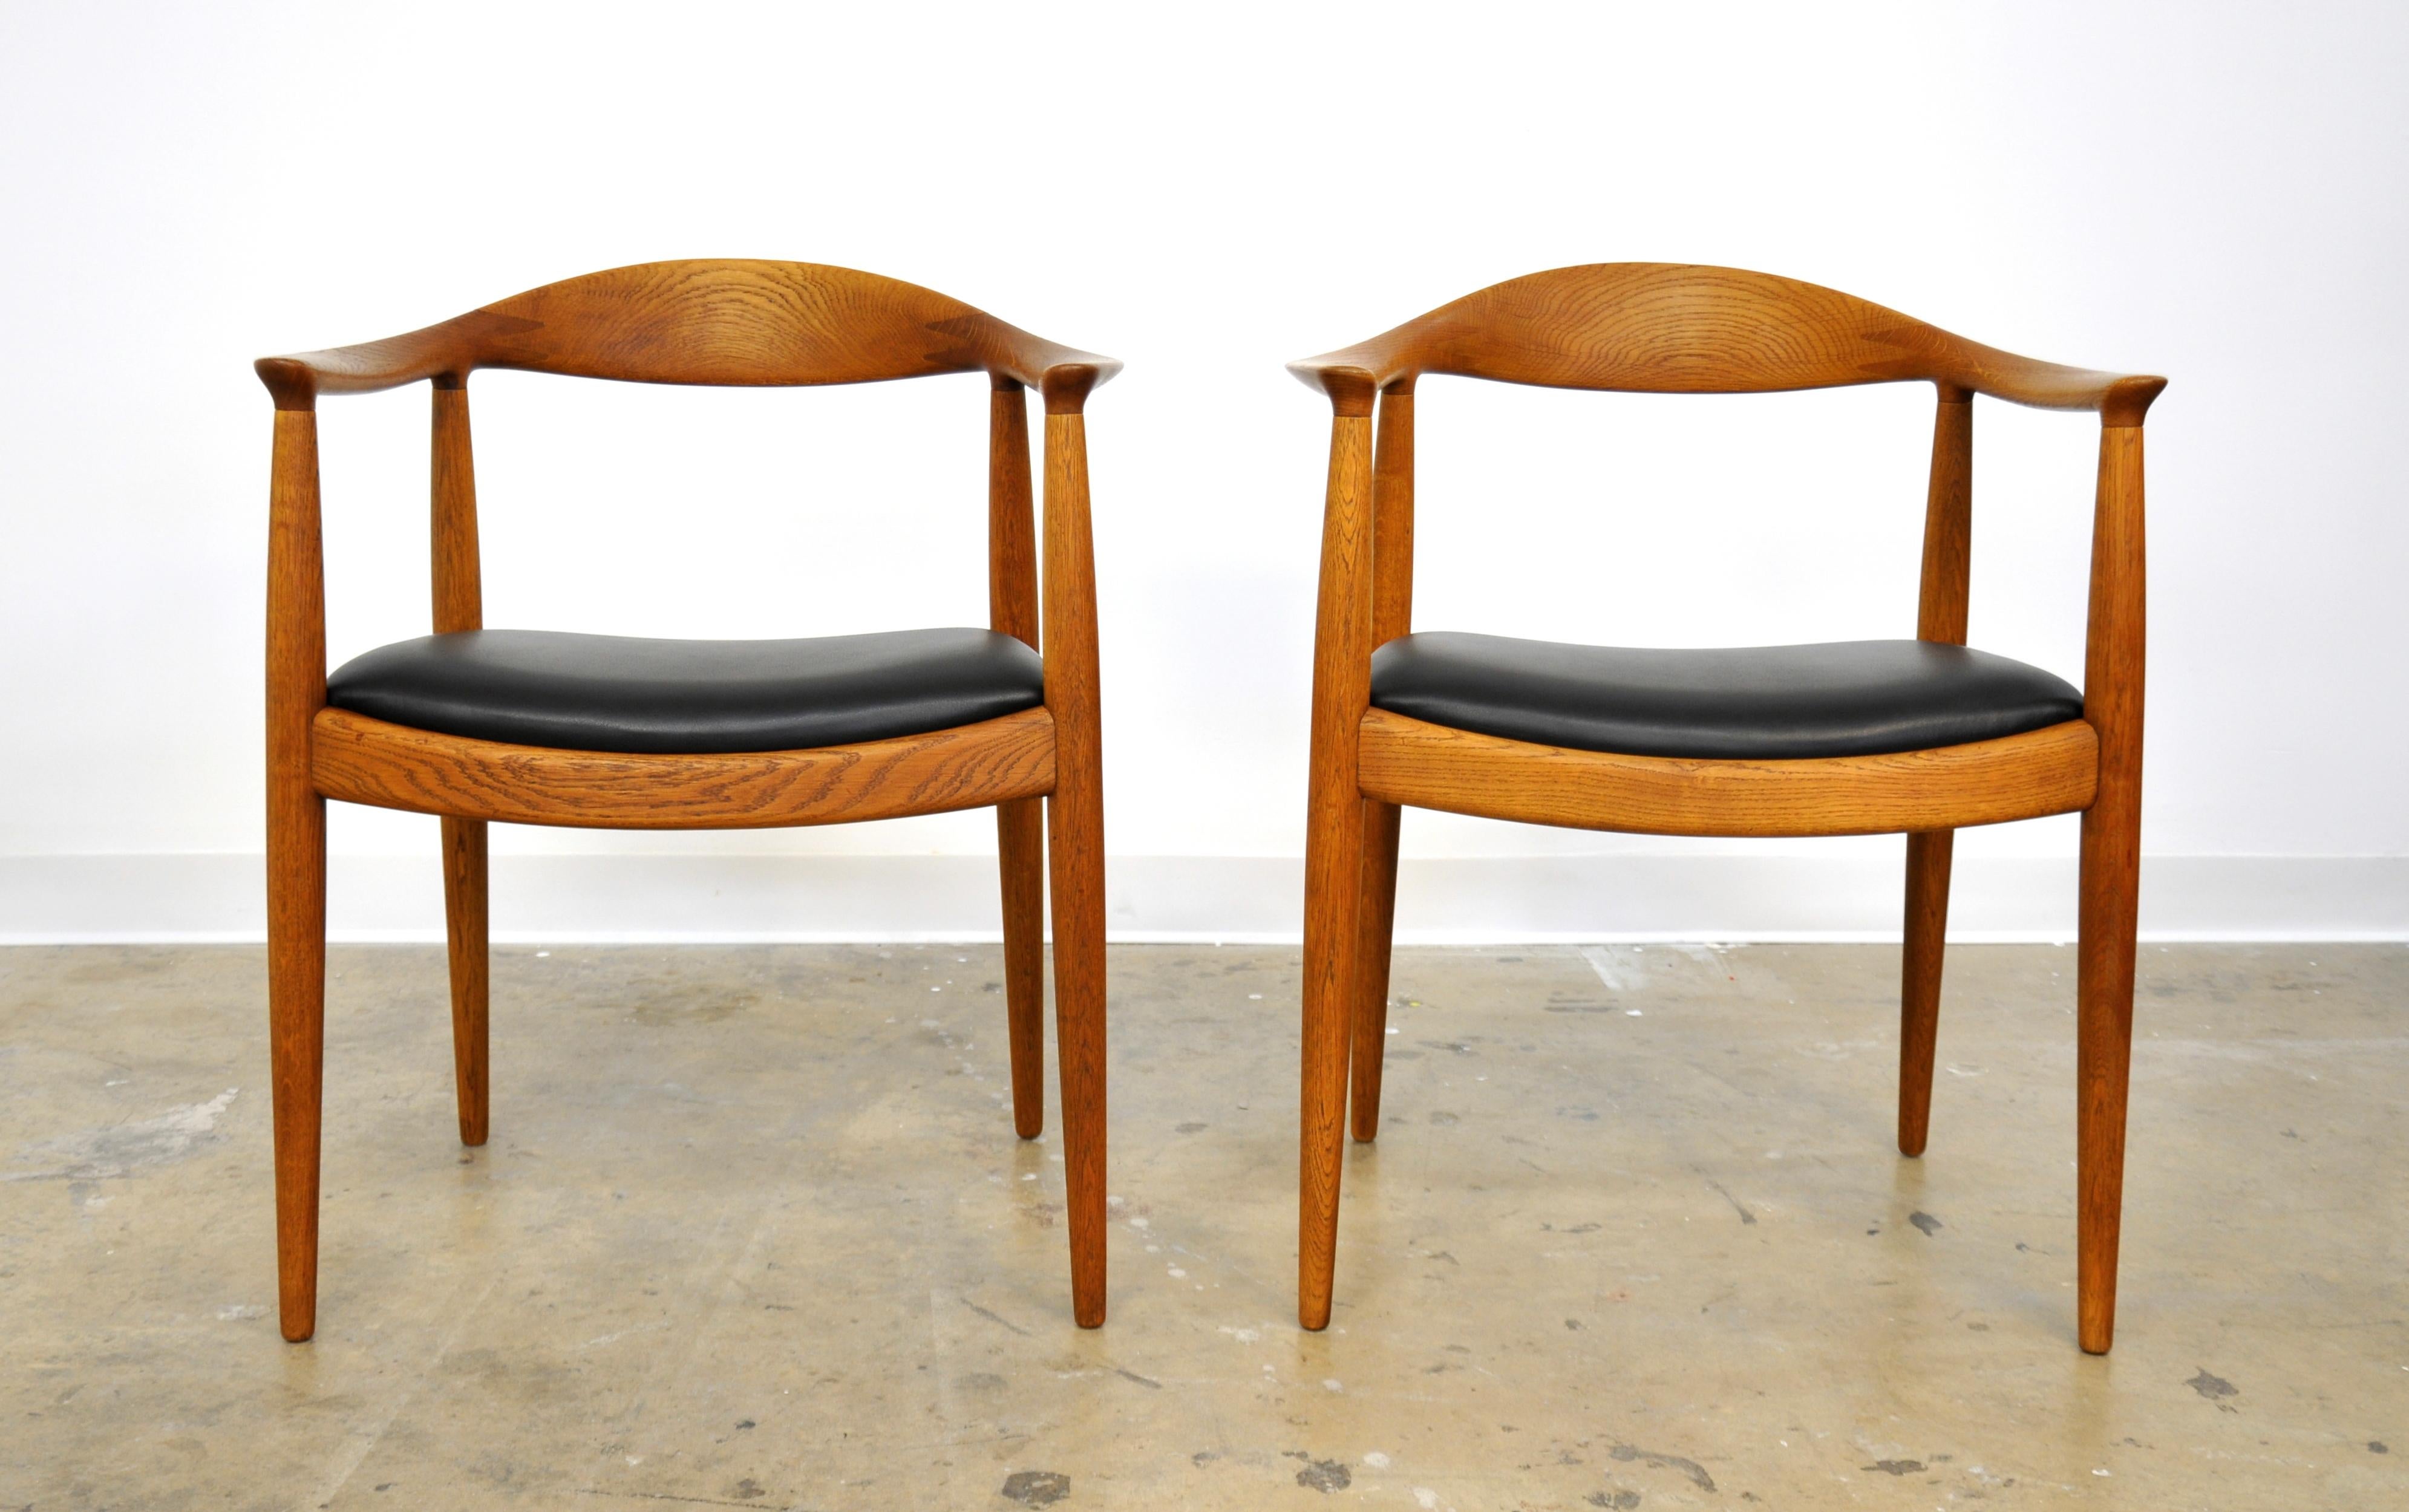 A gorgeous pair of iconic midcentury Danish modern JH 503 armchairs, also known as 